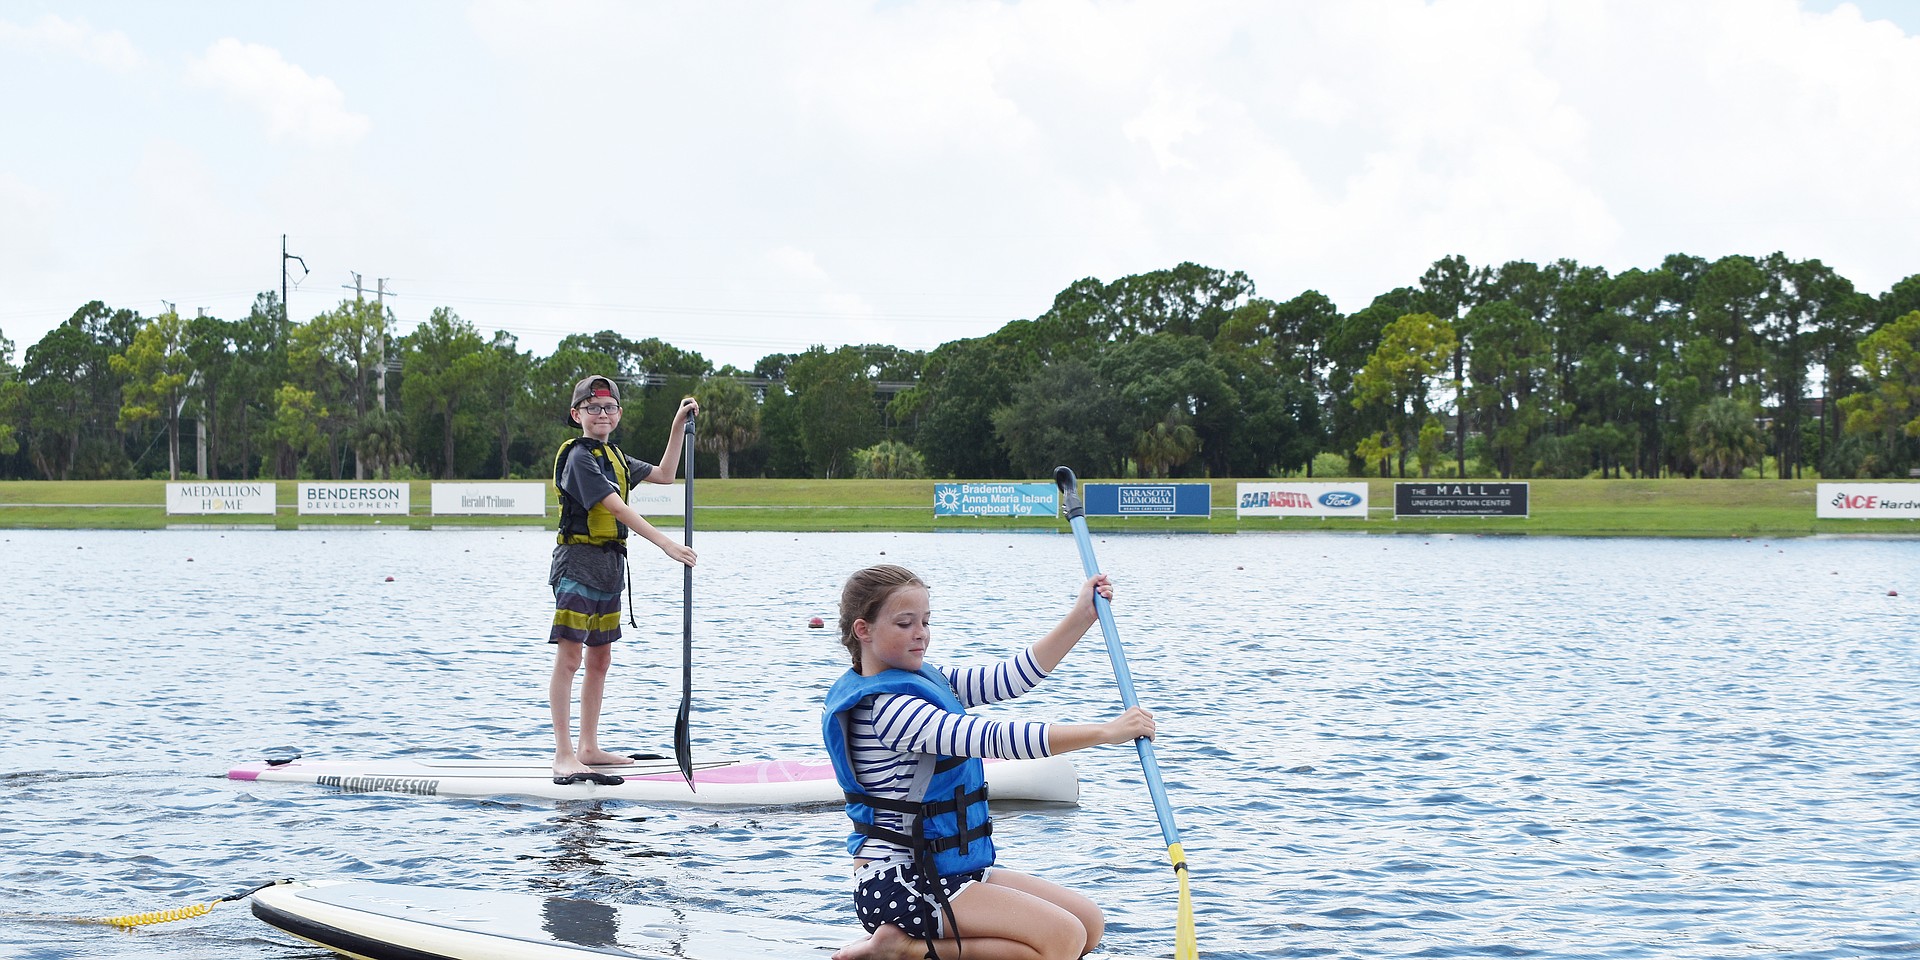 Nathan Benderson Park holds four summer camps for kids ages 6-14.